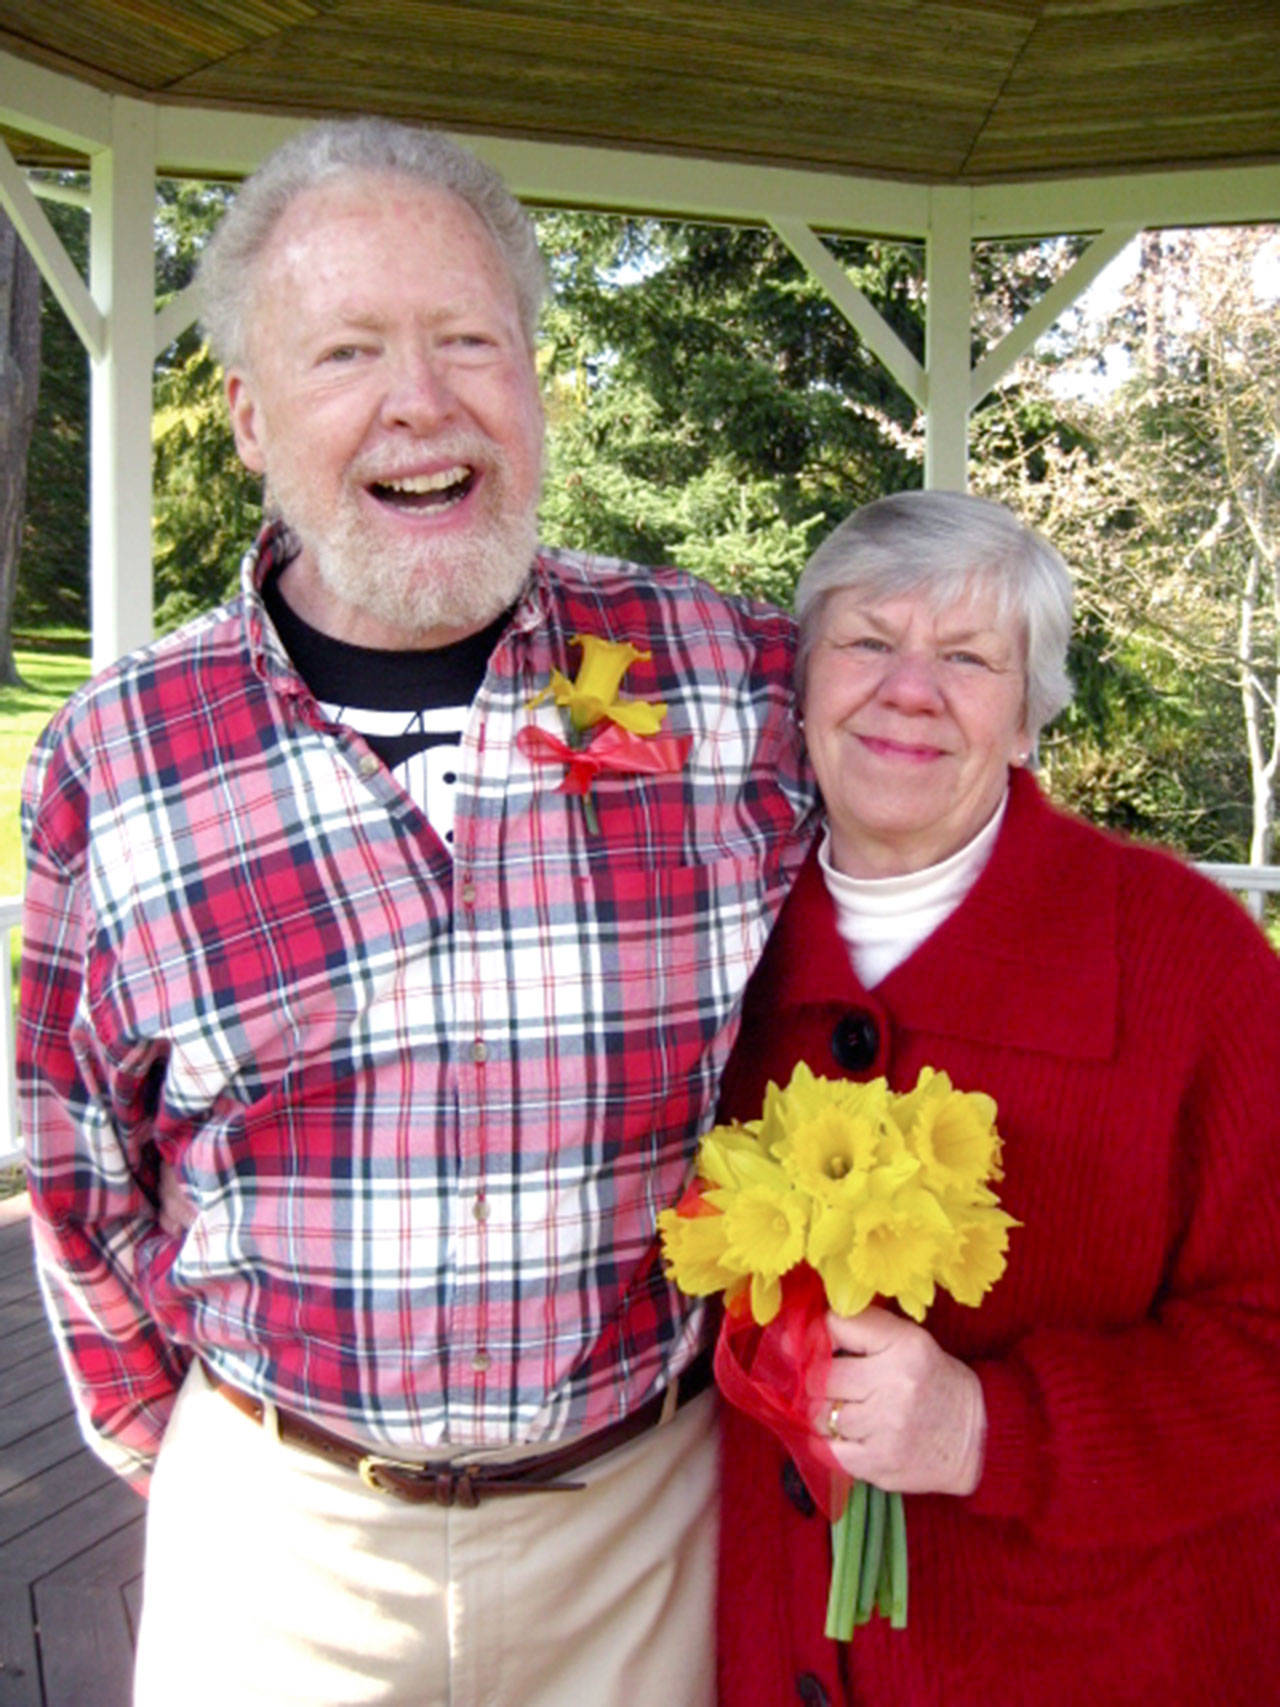 The late Joe and Peggy Ryan bequeathed gifts of about $170,000 each to the Port Townsend Marine Science Center and the Habitat for Humanity of East Jefferson County.